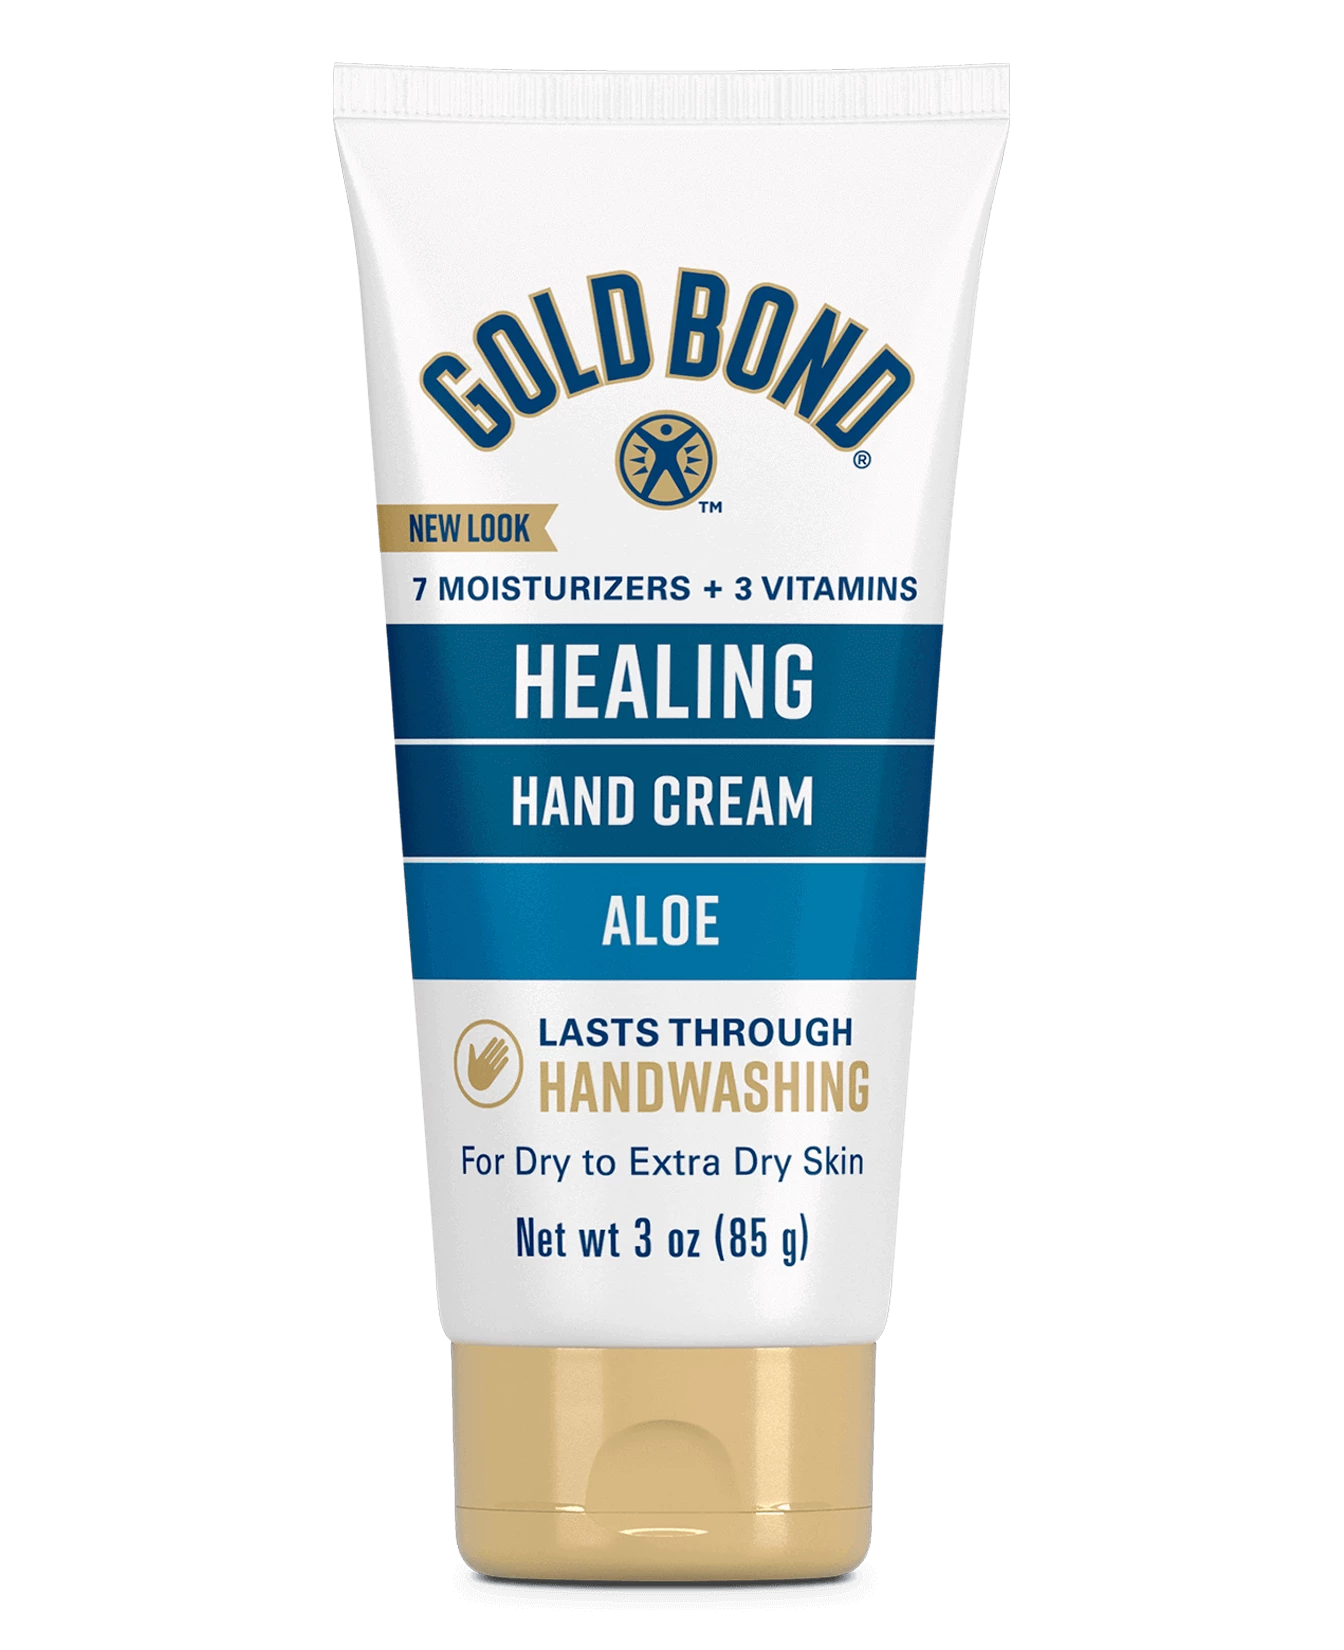 Hand | Gold Bond Skin Care Products